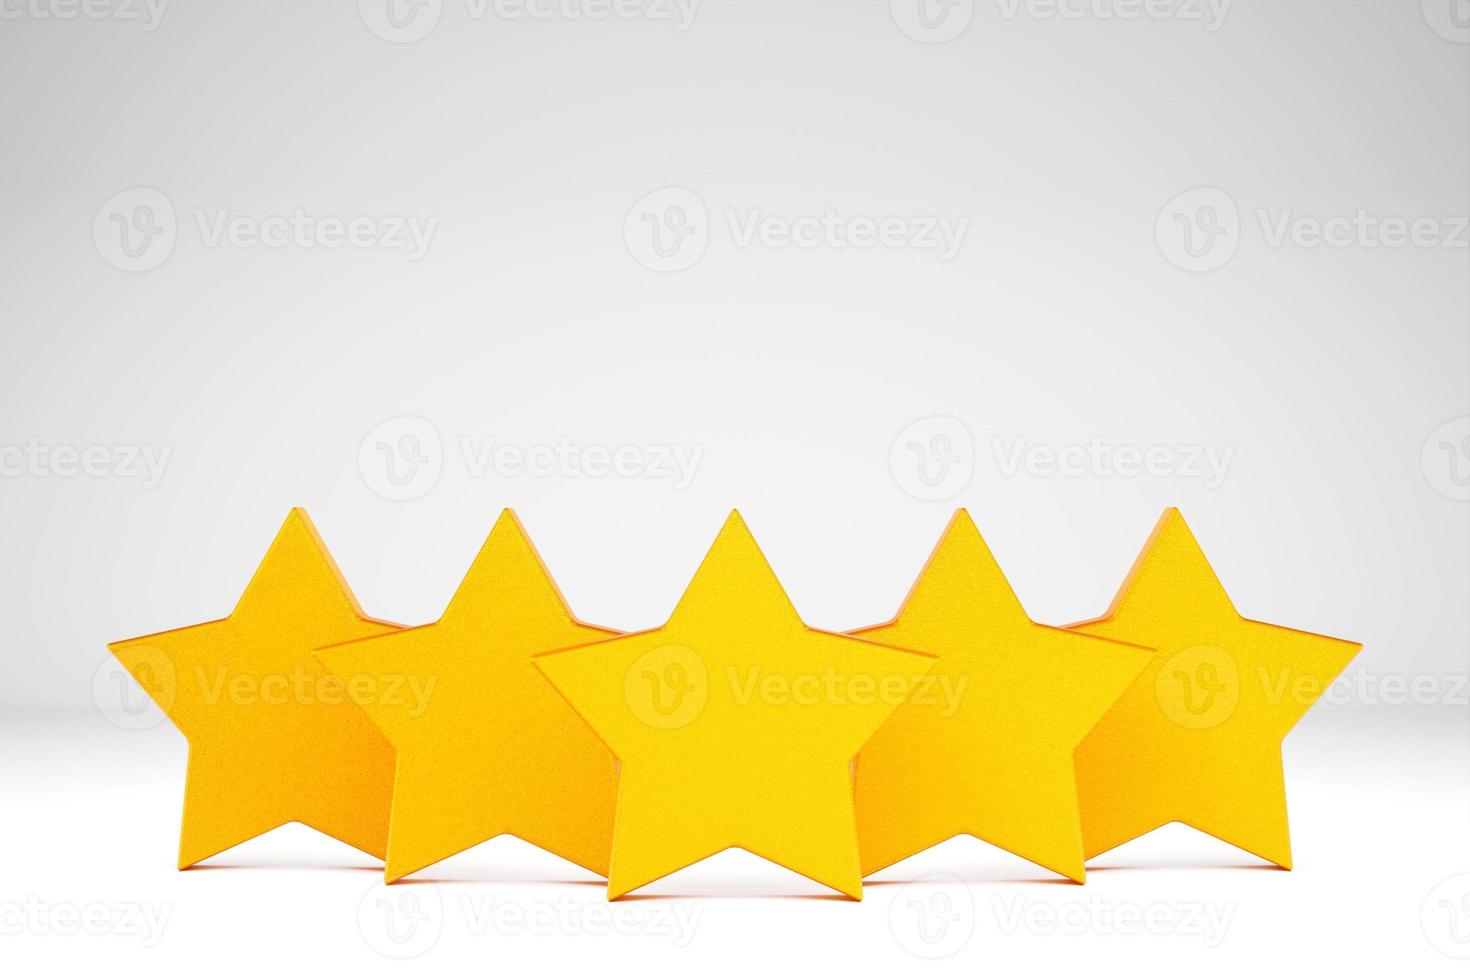 3d illustration 5 golden stars stands in a row on white isolated background. photo